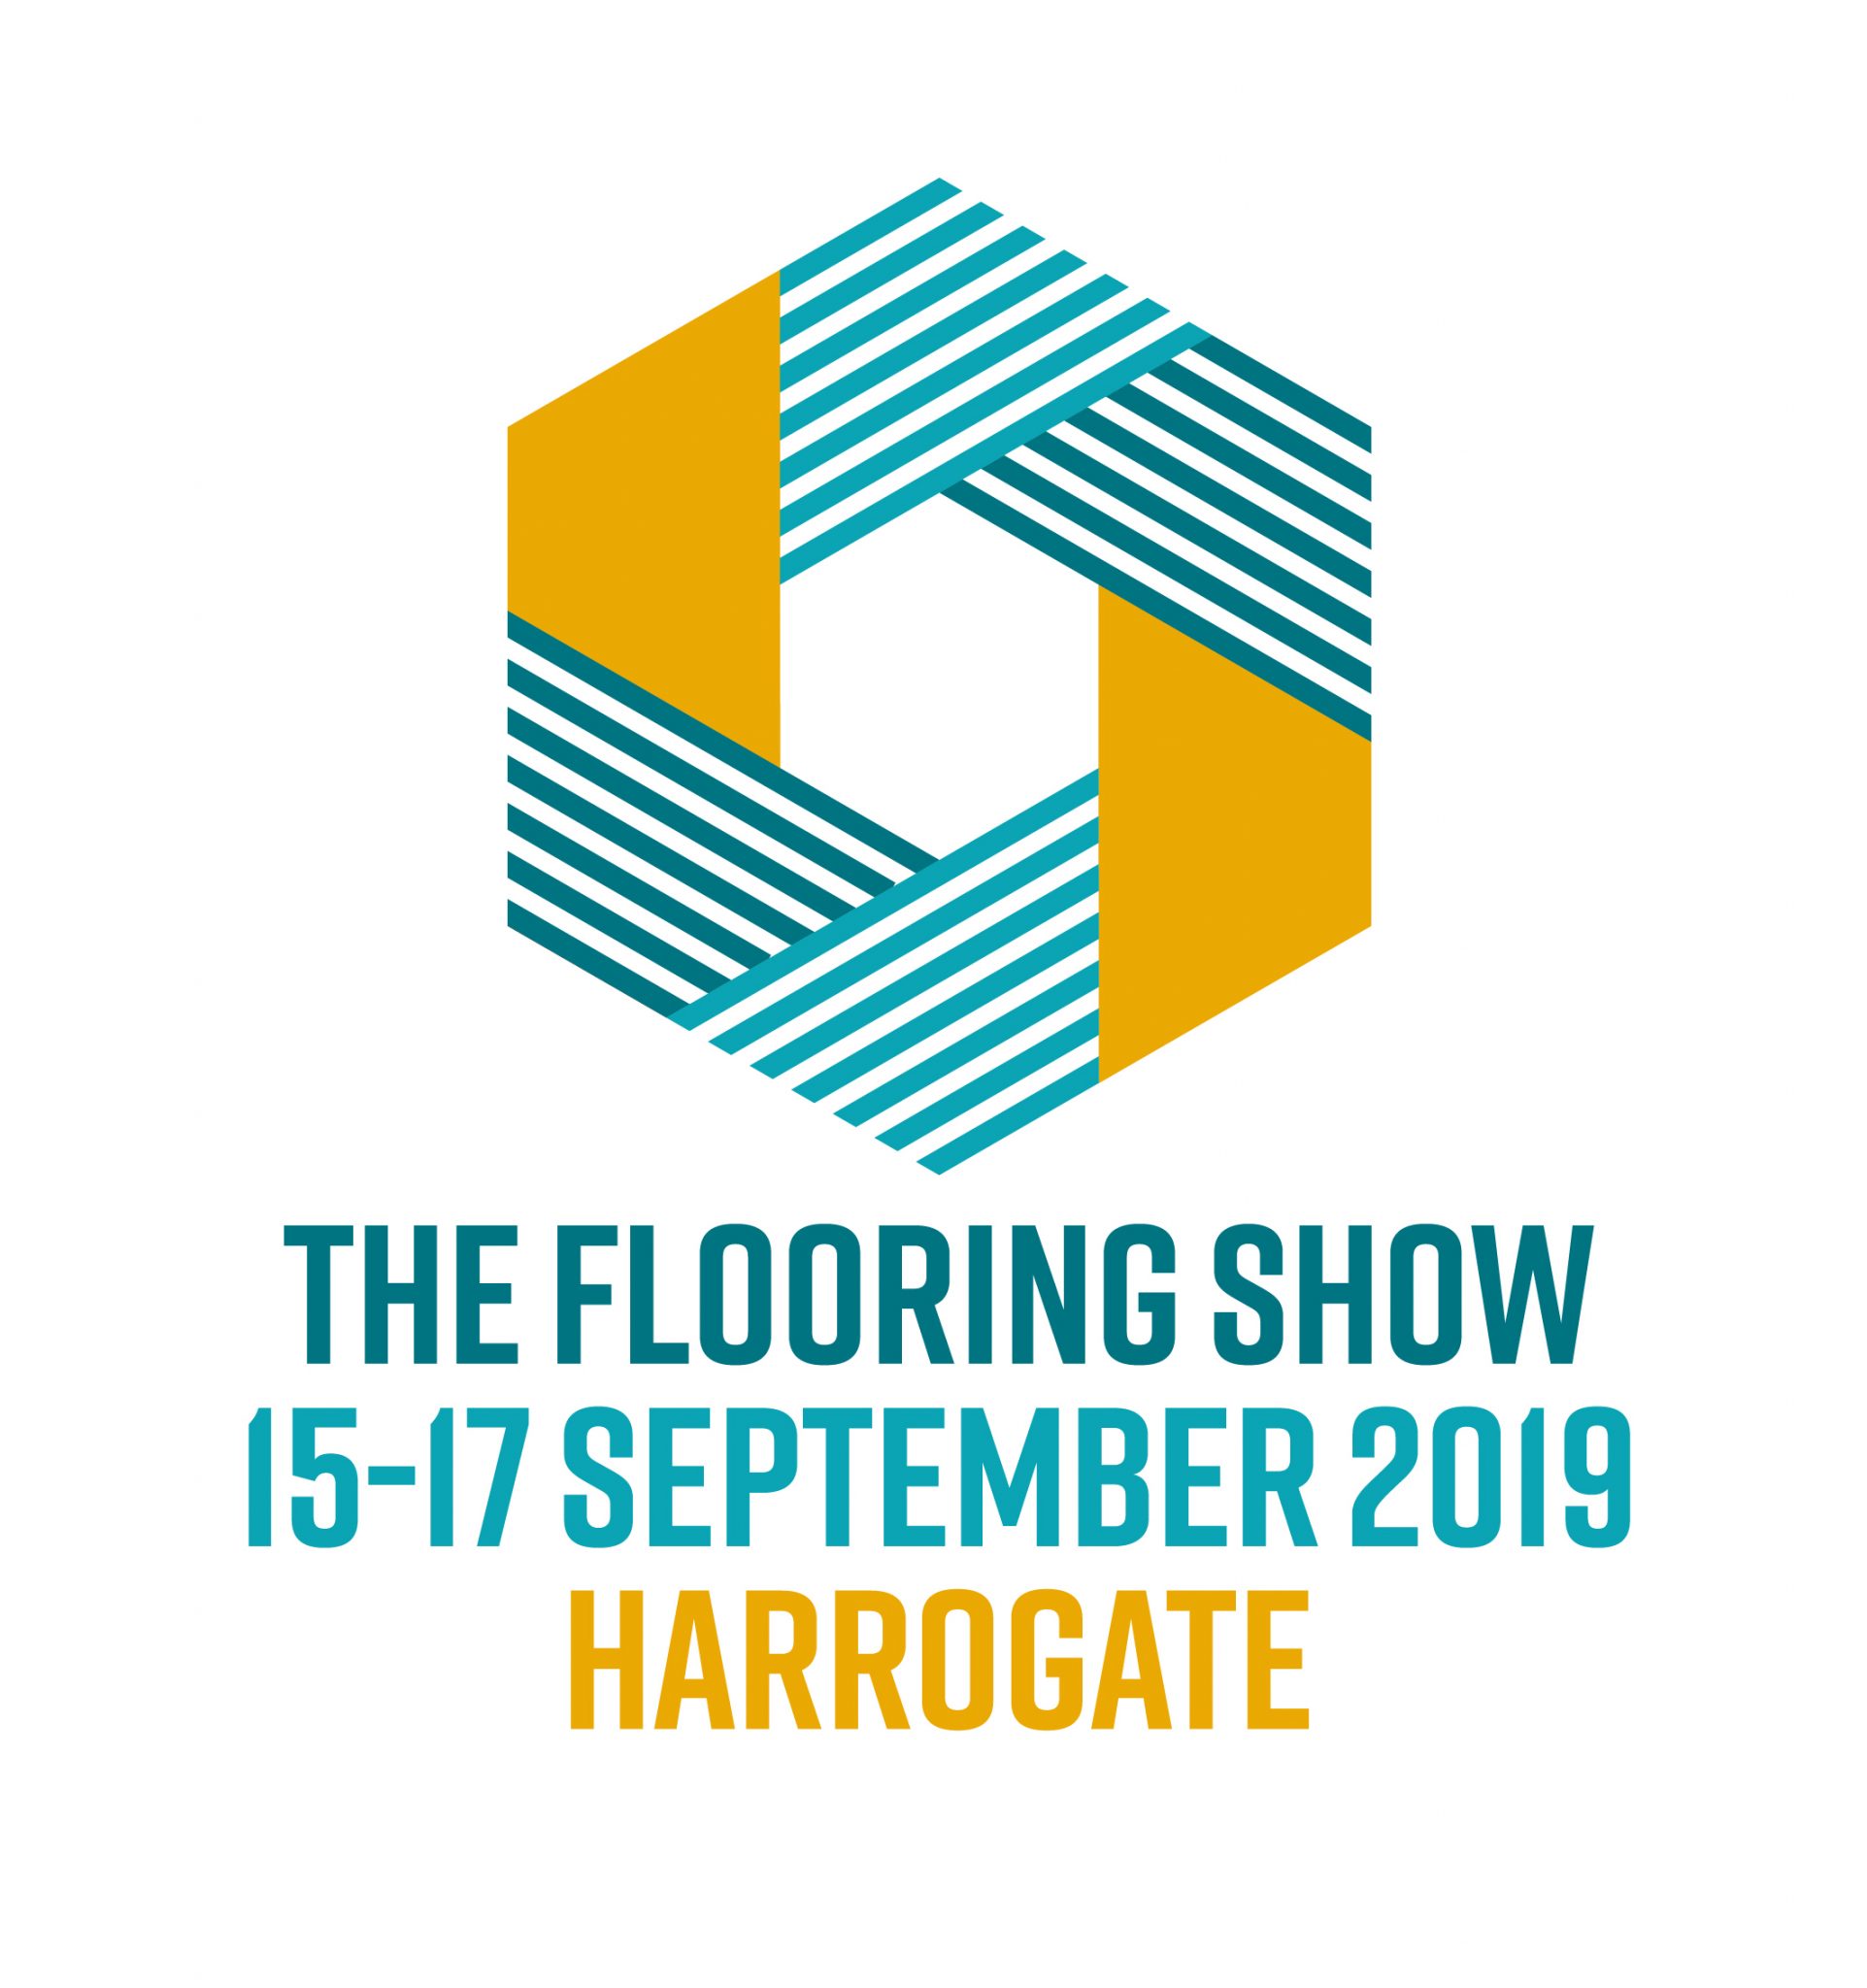 THE 2018 FLOORING SHOW ATTRACTS QUALITY BUYERS